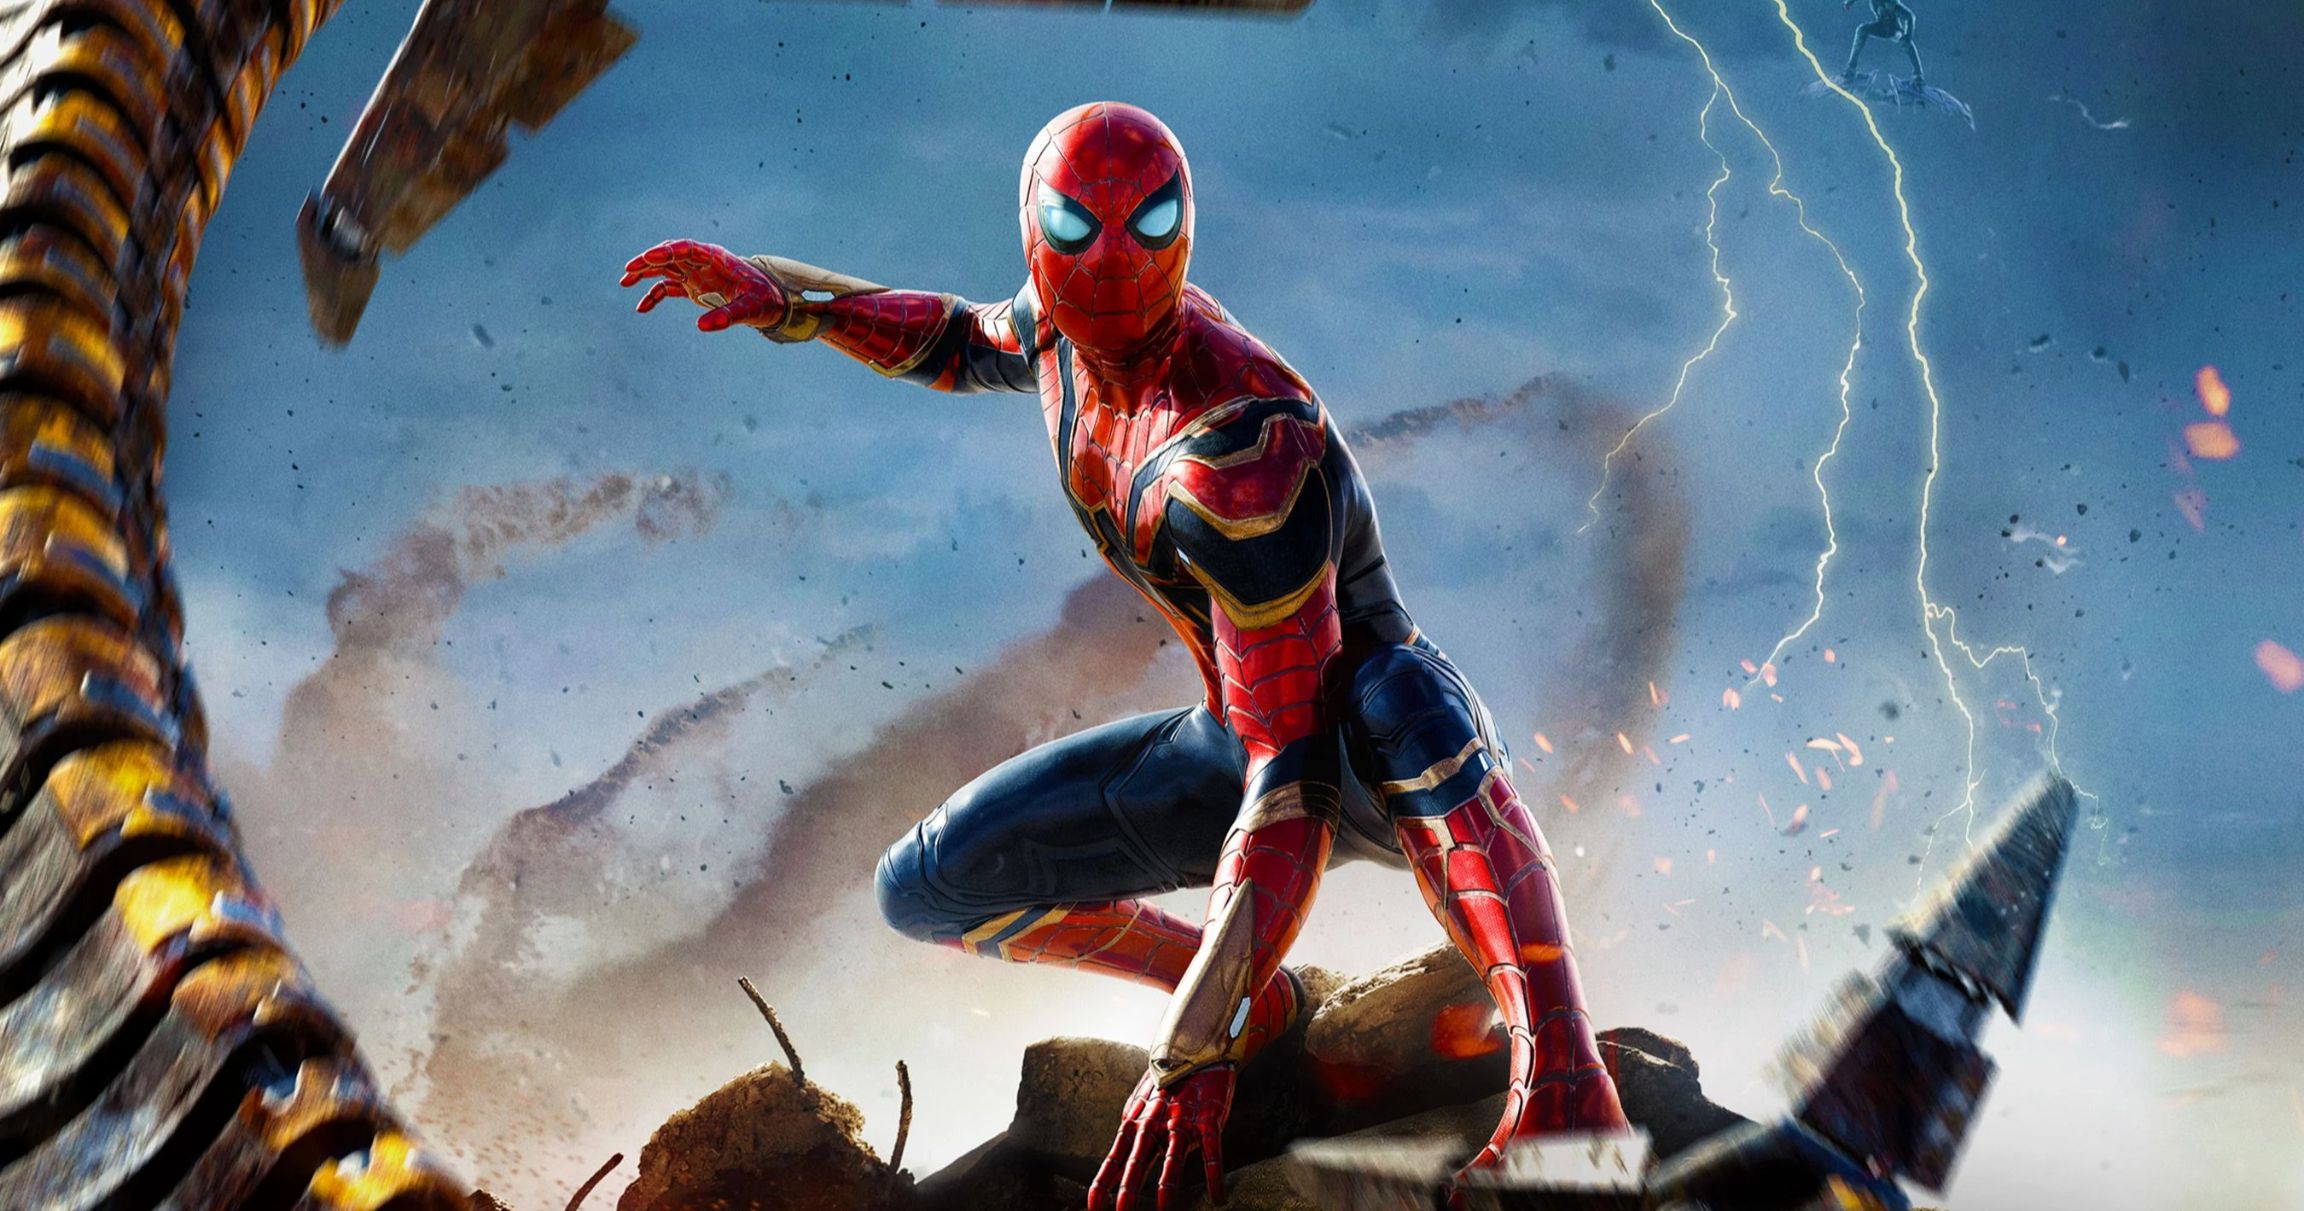 Spider-Man: No Way Home Second Trailer Launch Event Announced